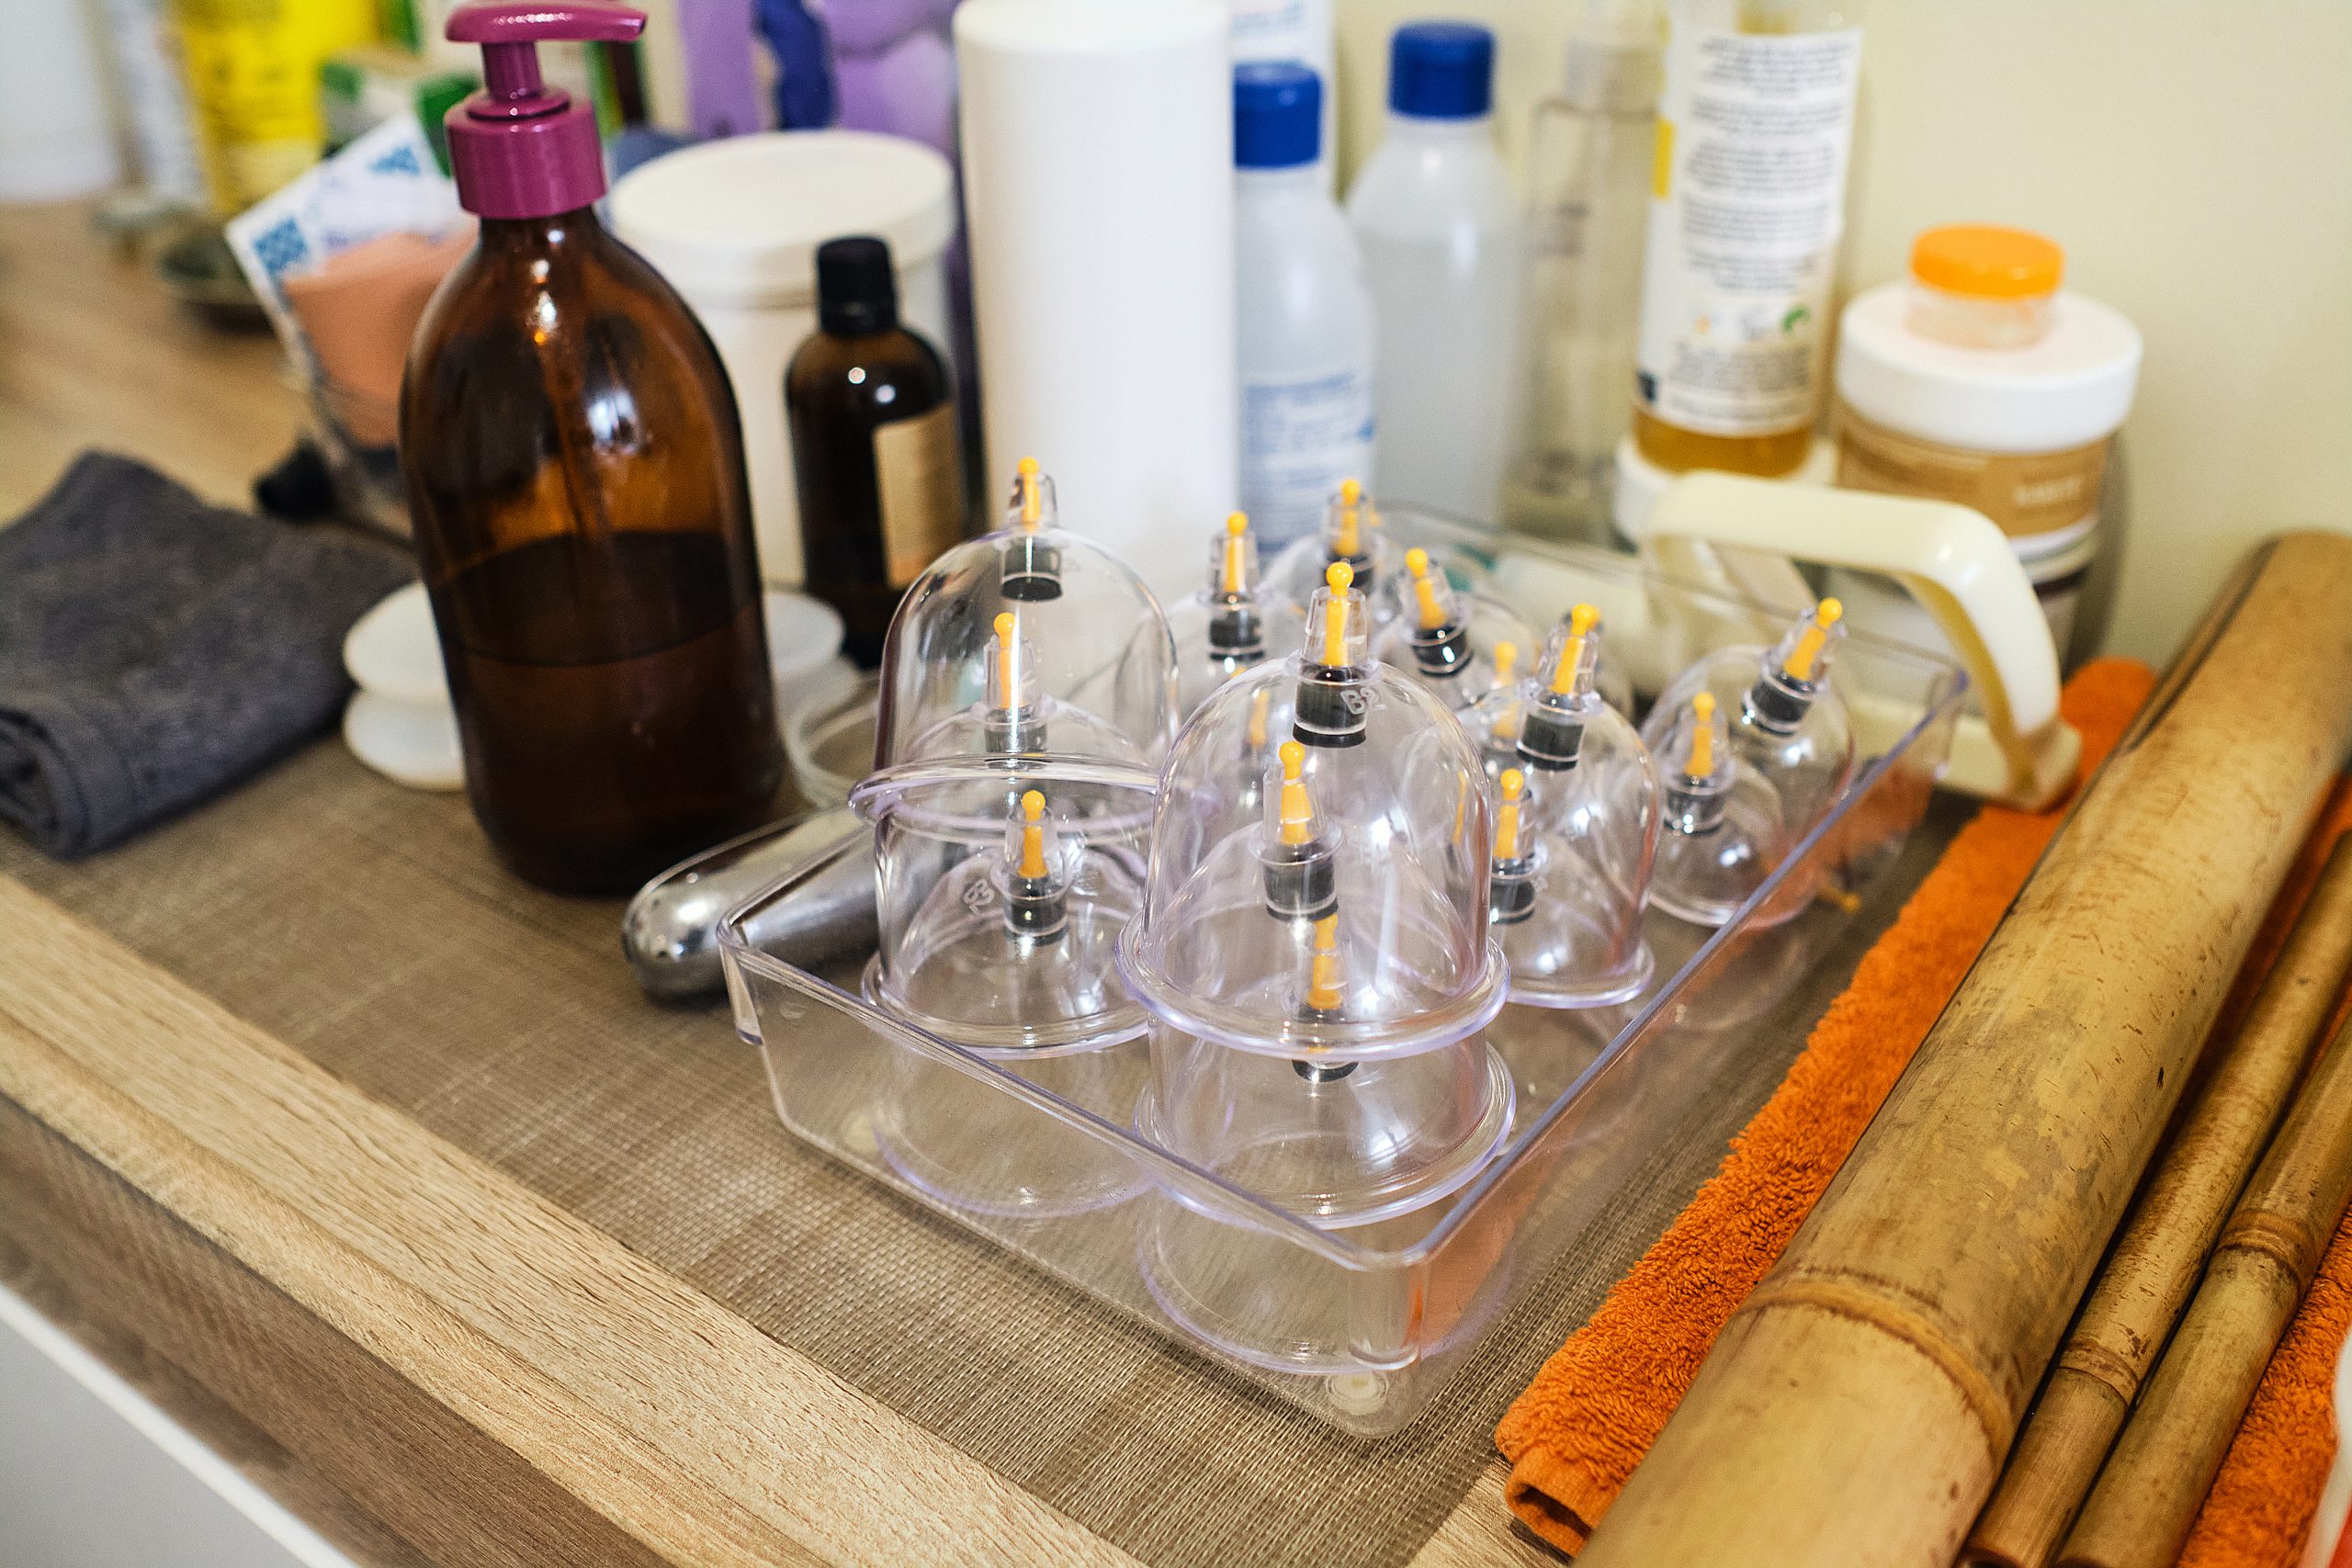 Primary Health Care Corporation Officially Introduces Cupping Therapy